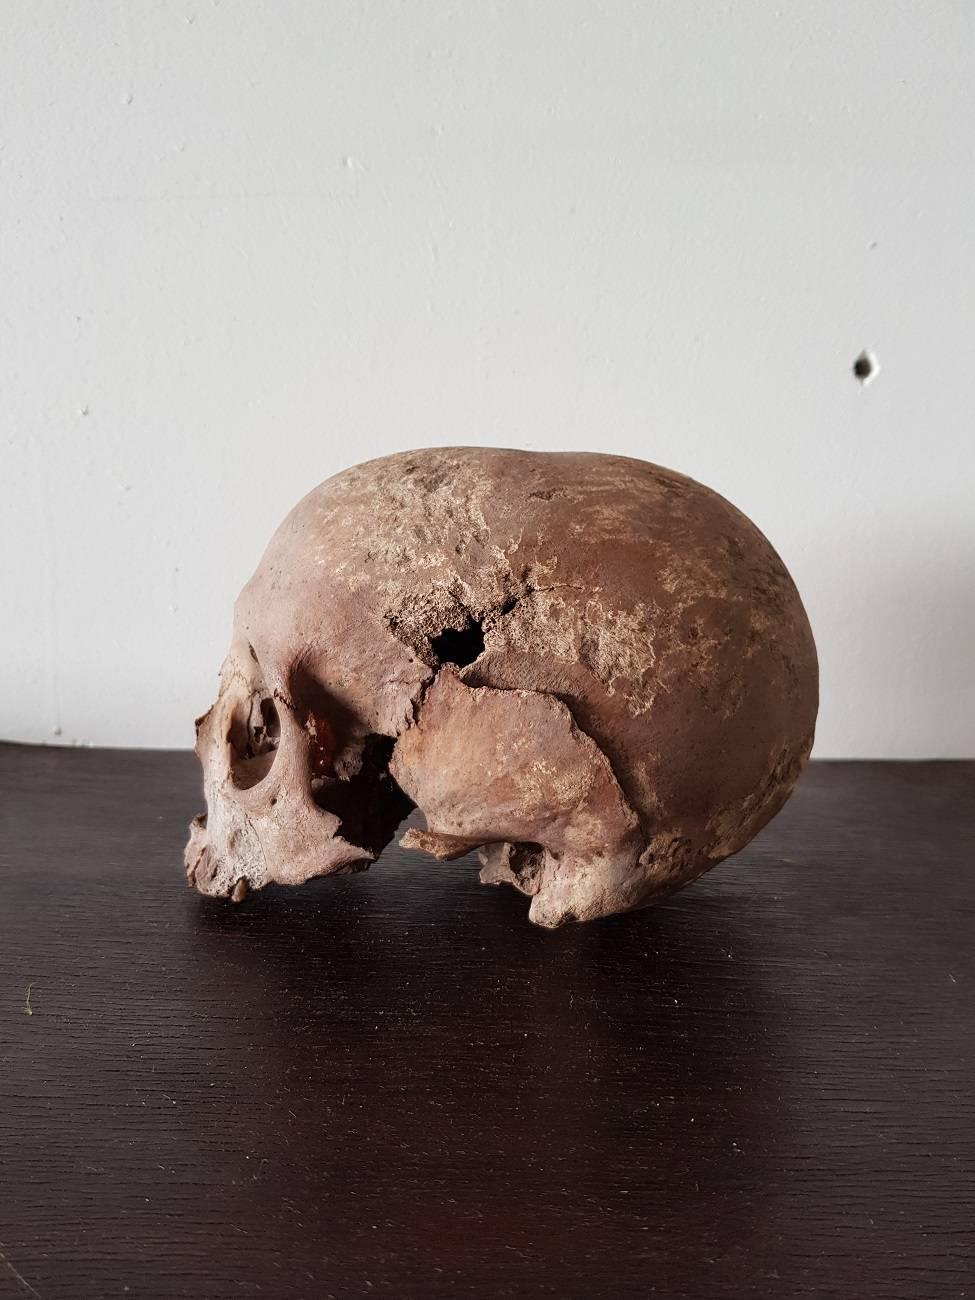 Original antique human skull from the 19th century with a skull trauma to the left side, it comes from a private collection and bought legally.

The measurements are,
Depth 18 cm/ 7 inch.
Width 14 cm/ 5.5 inch.
Height 13 cm/ 5.1 inch.
   